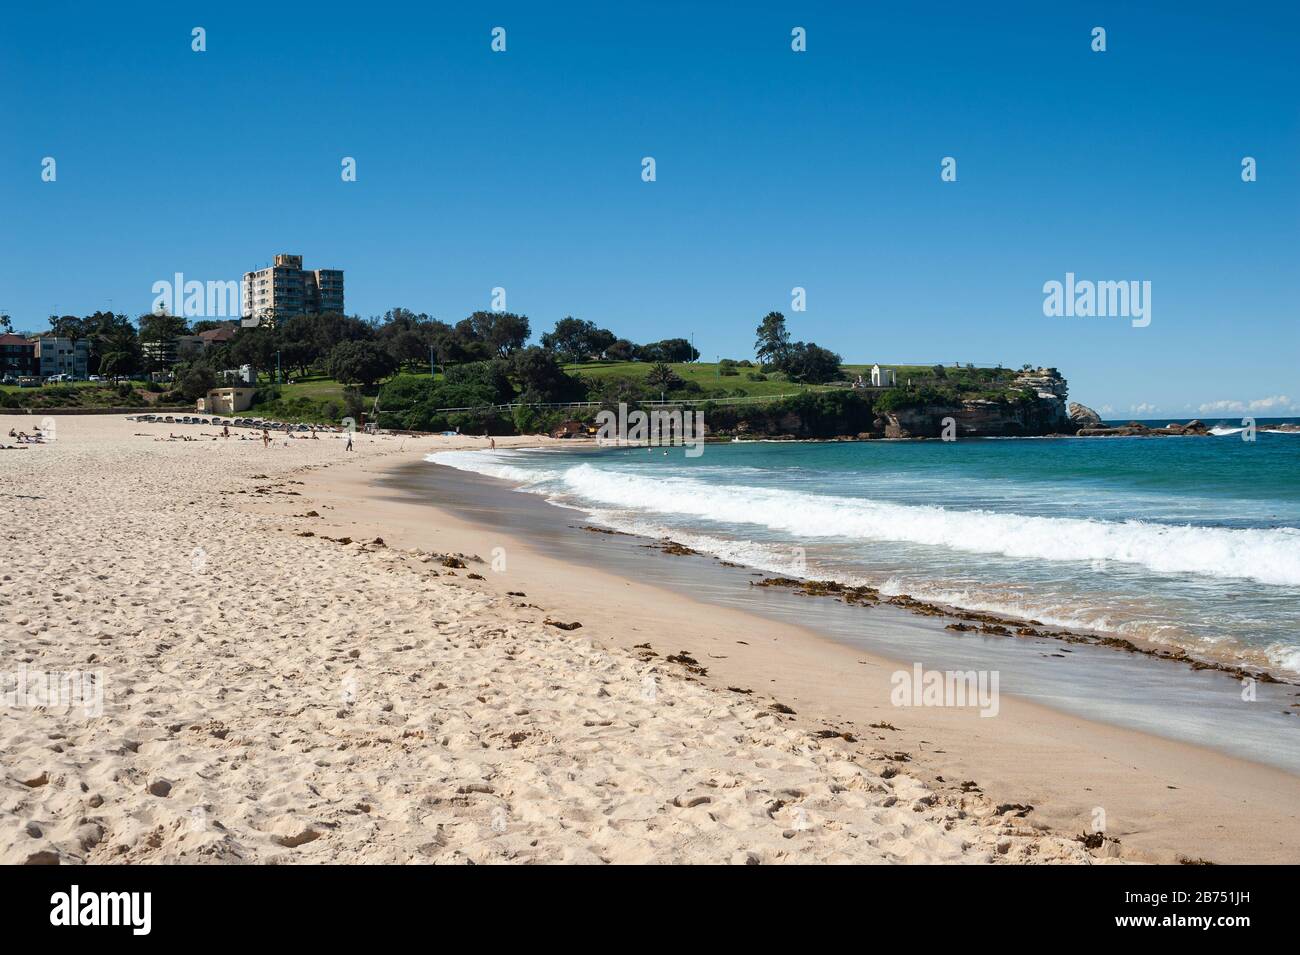 24.09.2019, Sydney, New South Wales, Australia - Sunny sand and sea under a bright blue sky on the beach of Coogee Beach. [automated translation] Stock Photo